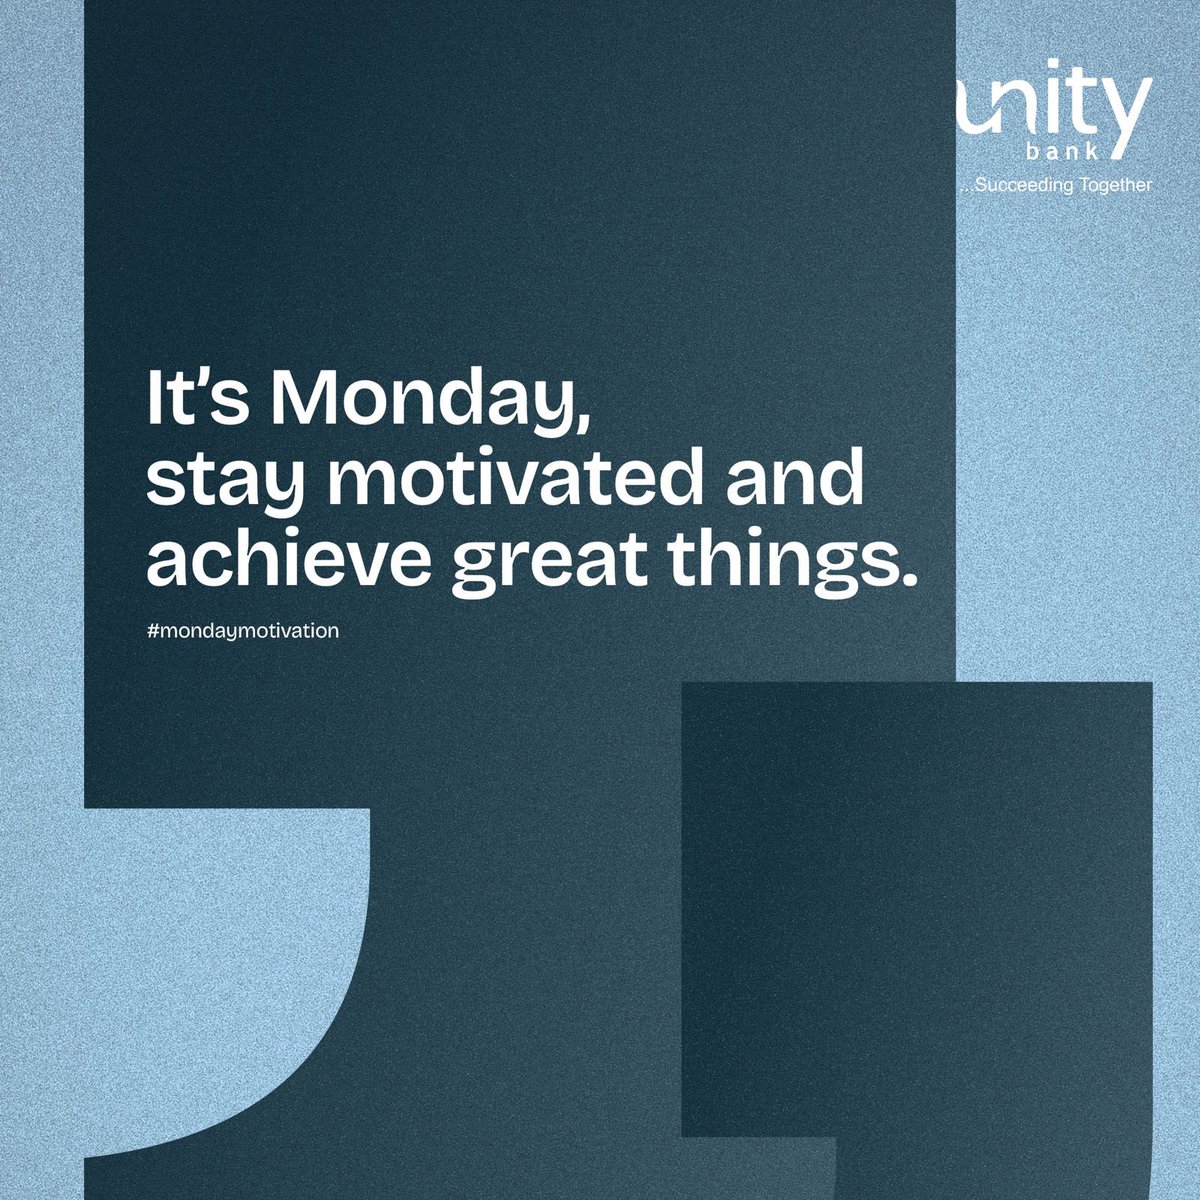 It’s another Monday to stay motivated and focus on your goals. #mondaymotivation #succeedingtogether